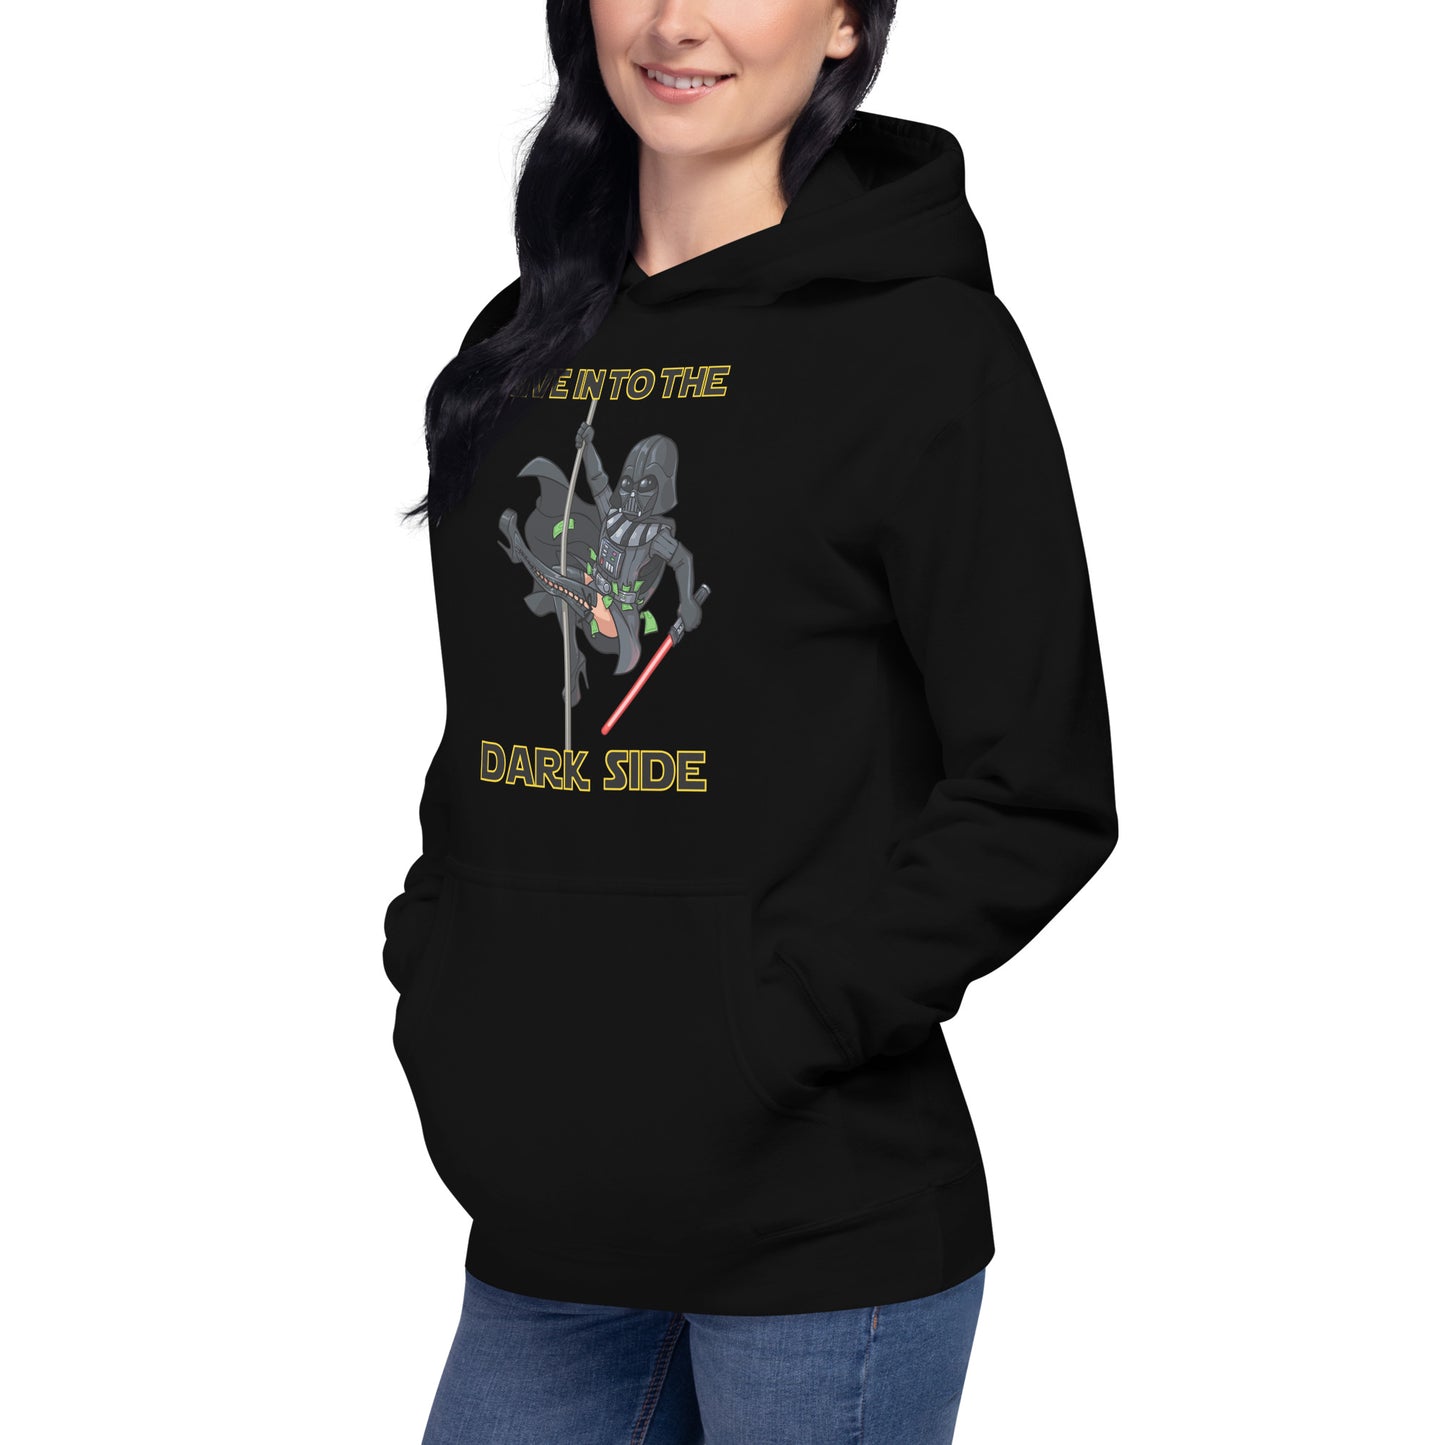 Give In To The Dark Side - Unisex Hoodie